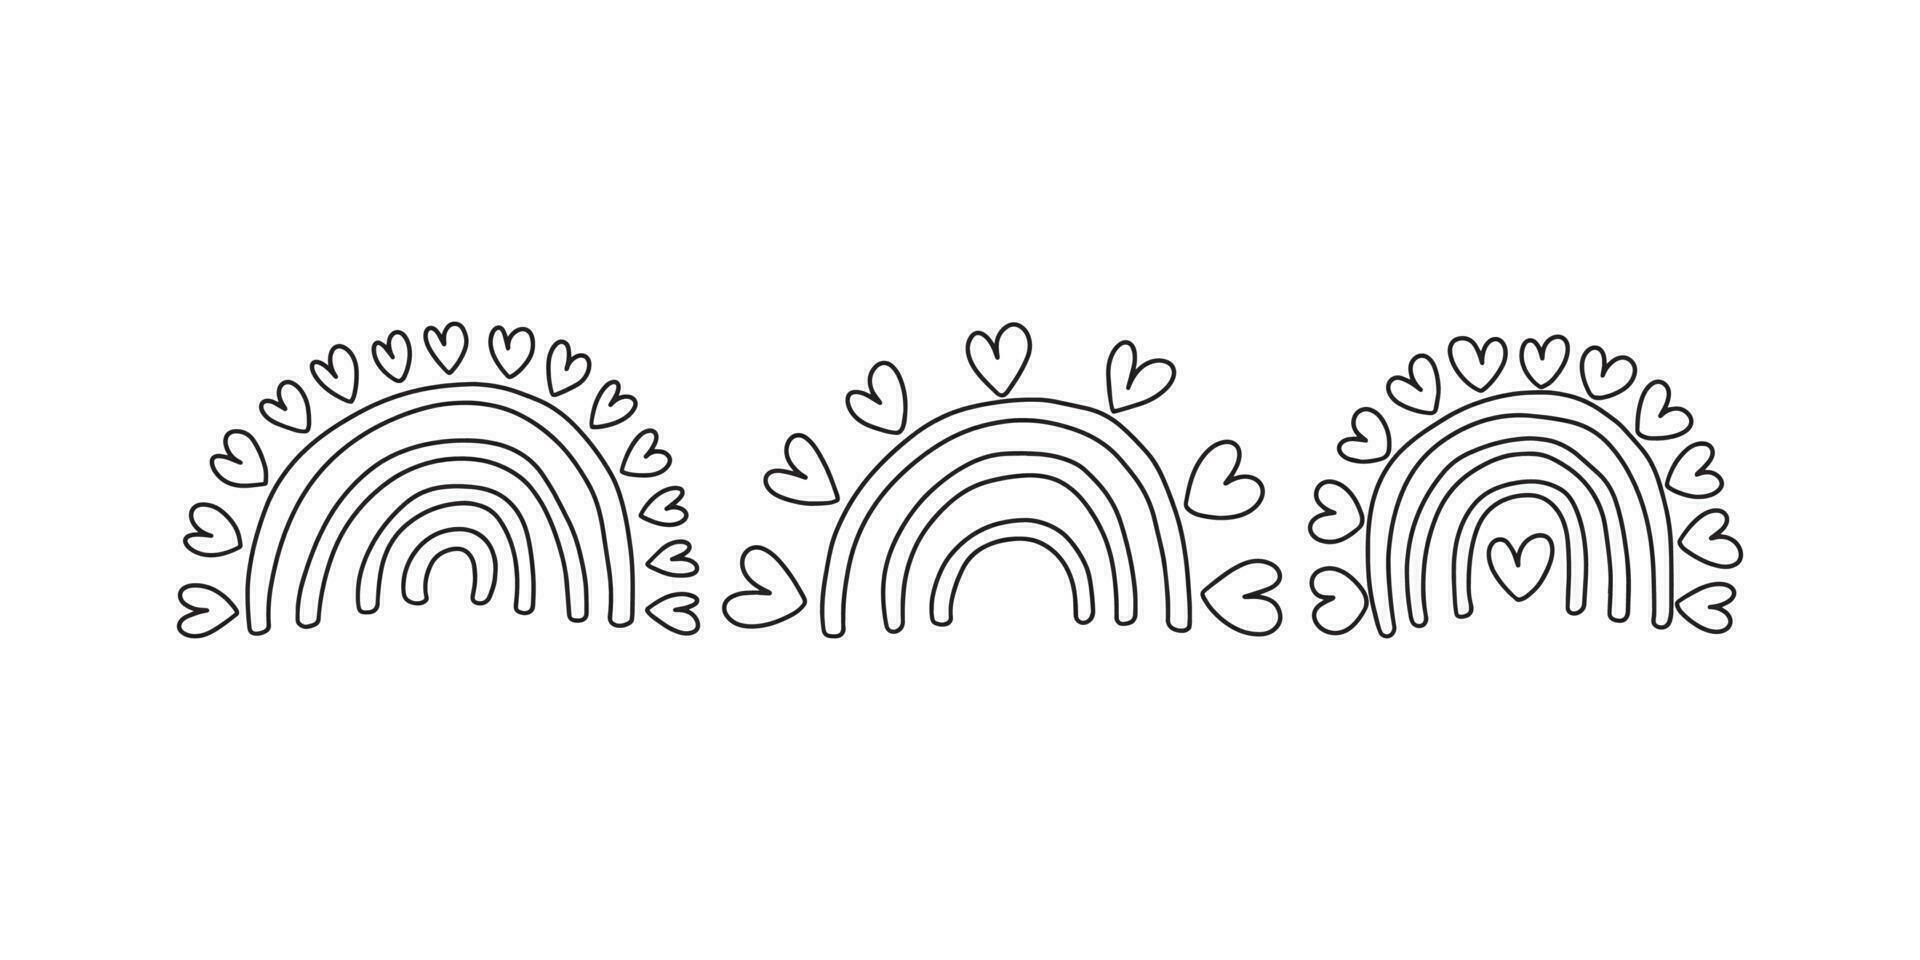 Cute doodle love rainbows set. Different kinds of rainbows with hearts vector set